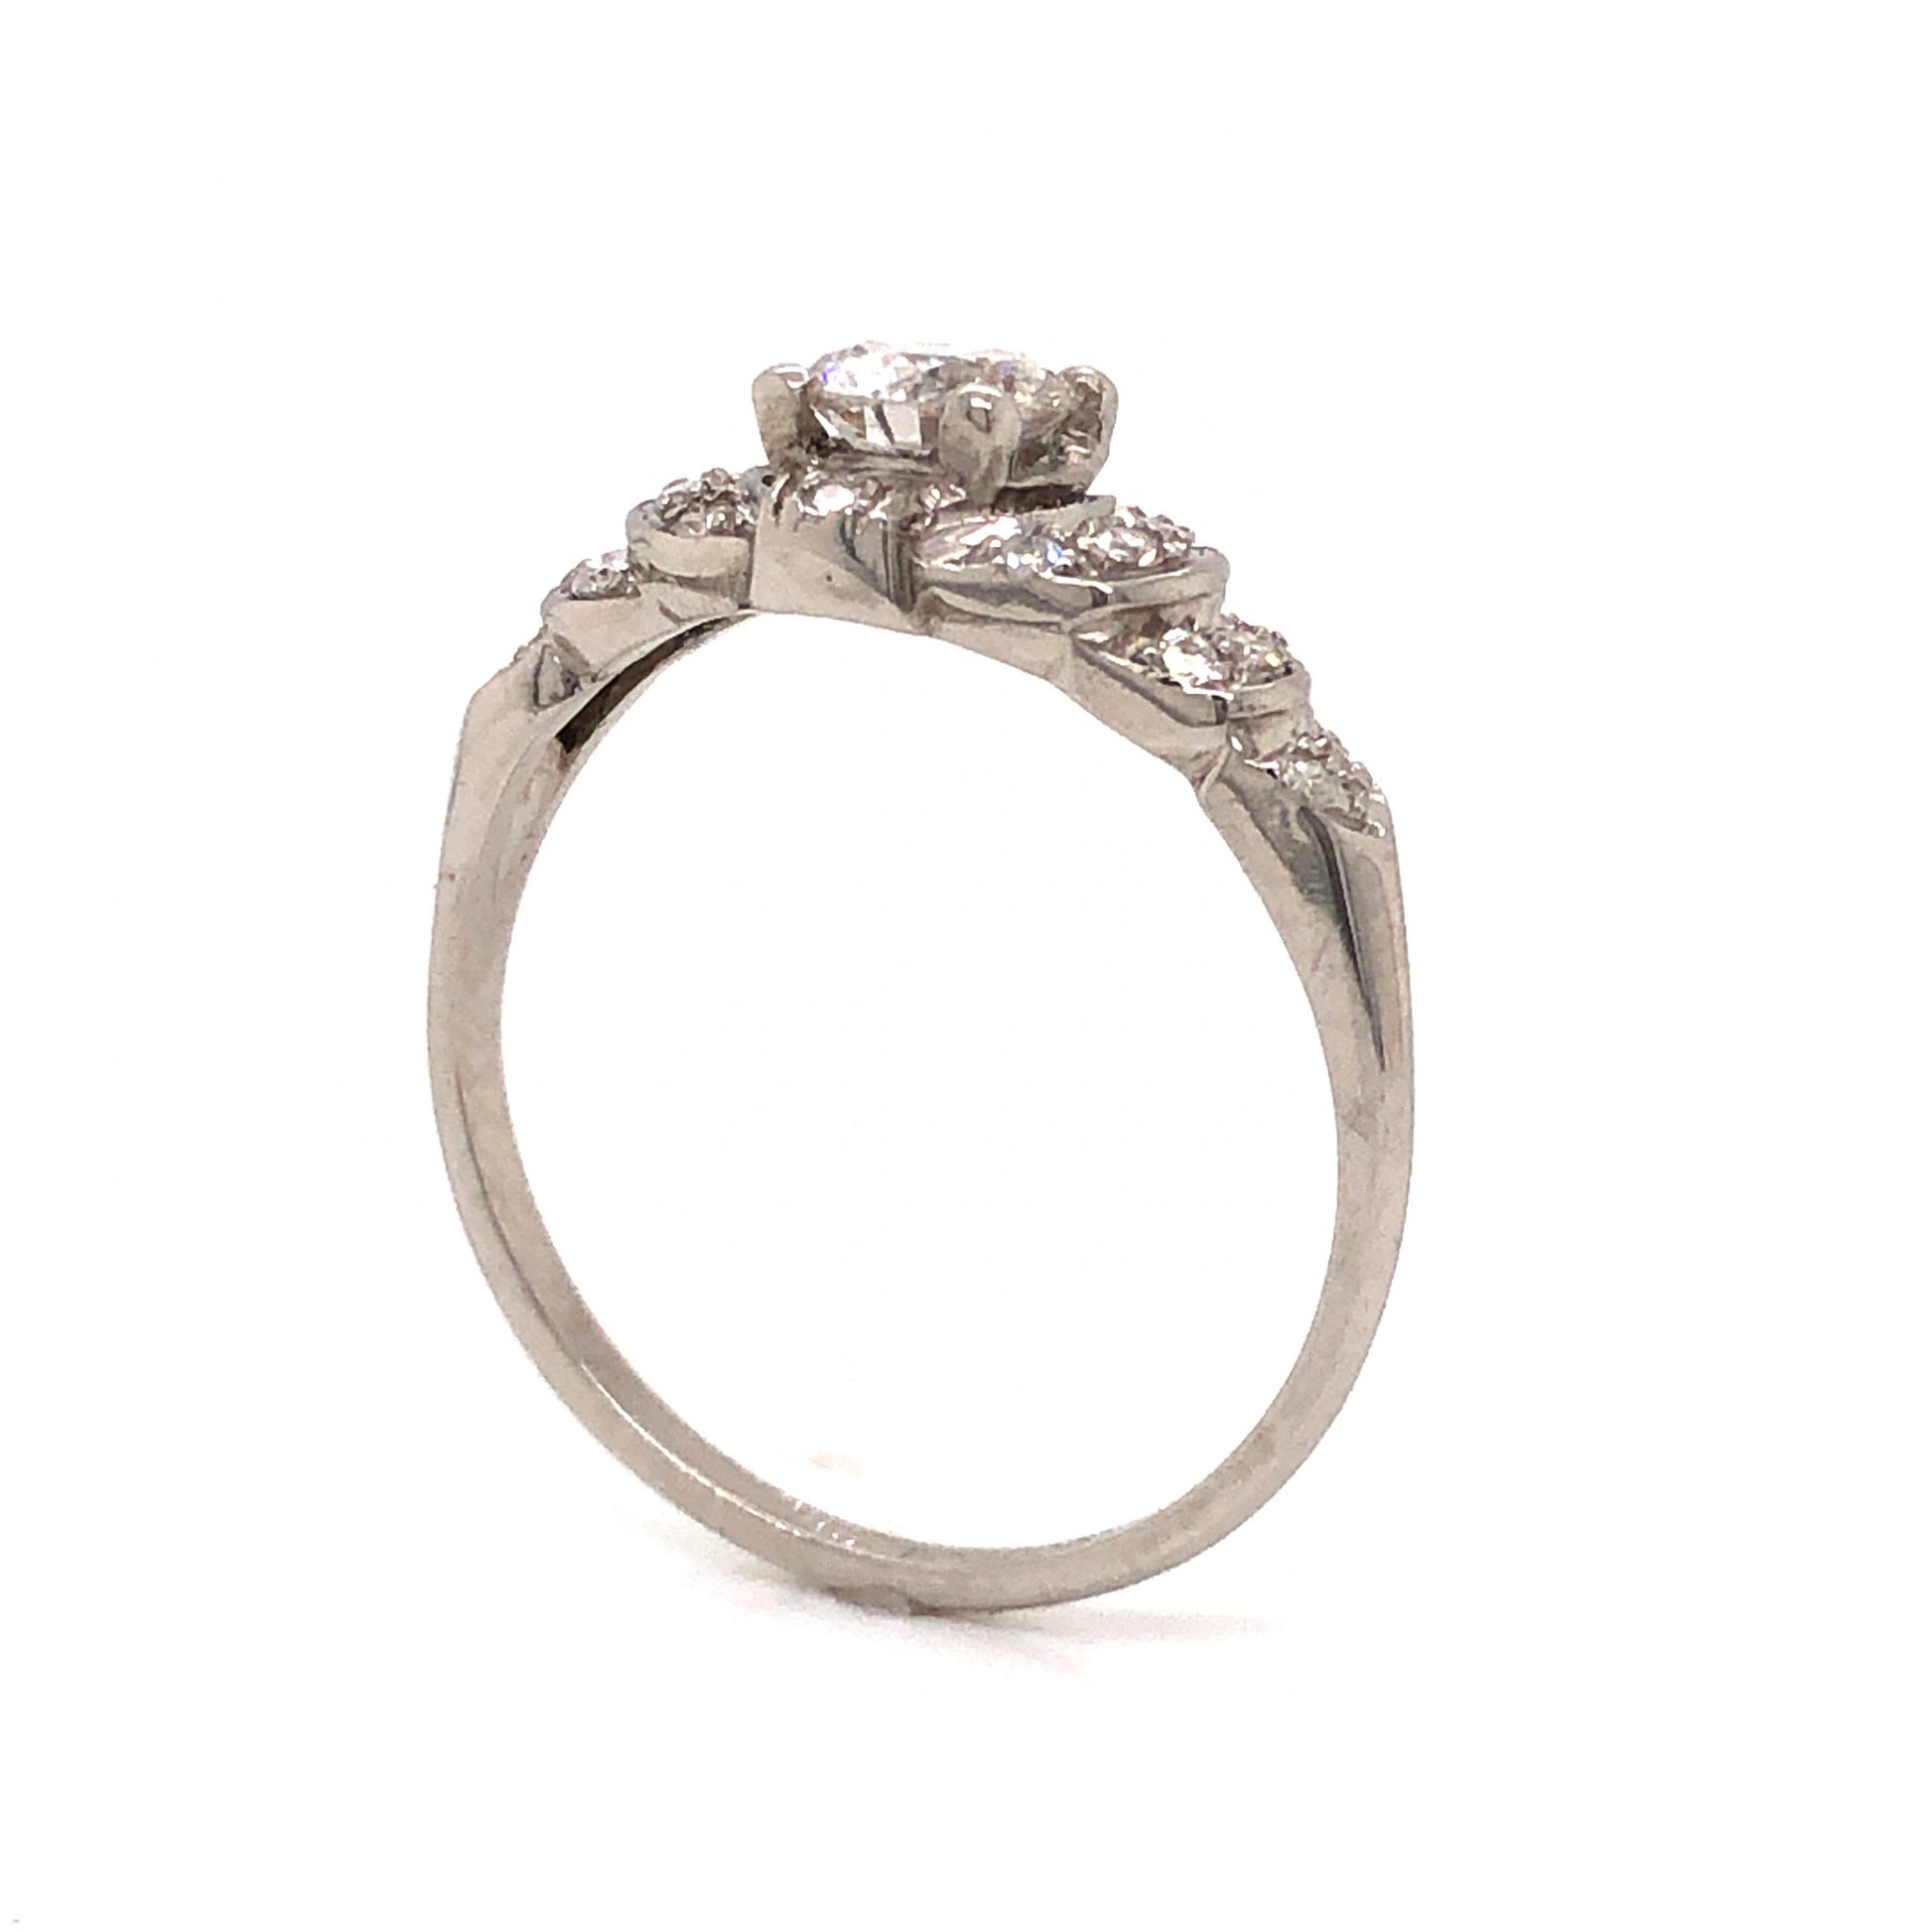 .43 Antique Art Deco Diamond Engagement Ring in PlatinumComposition: PlatinumRing Size: 7Total Diamond Weight: .58 ctTotal Gram Weight: 2.7 gInscription: 100 IRID 900 PLAT